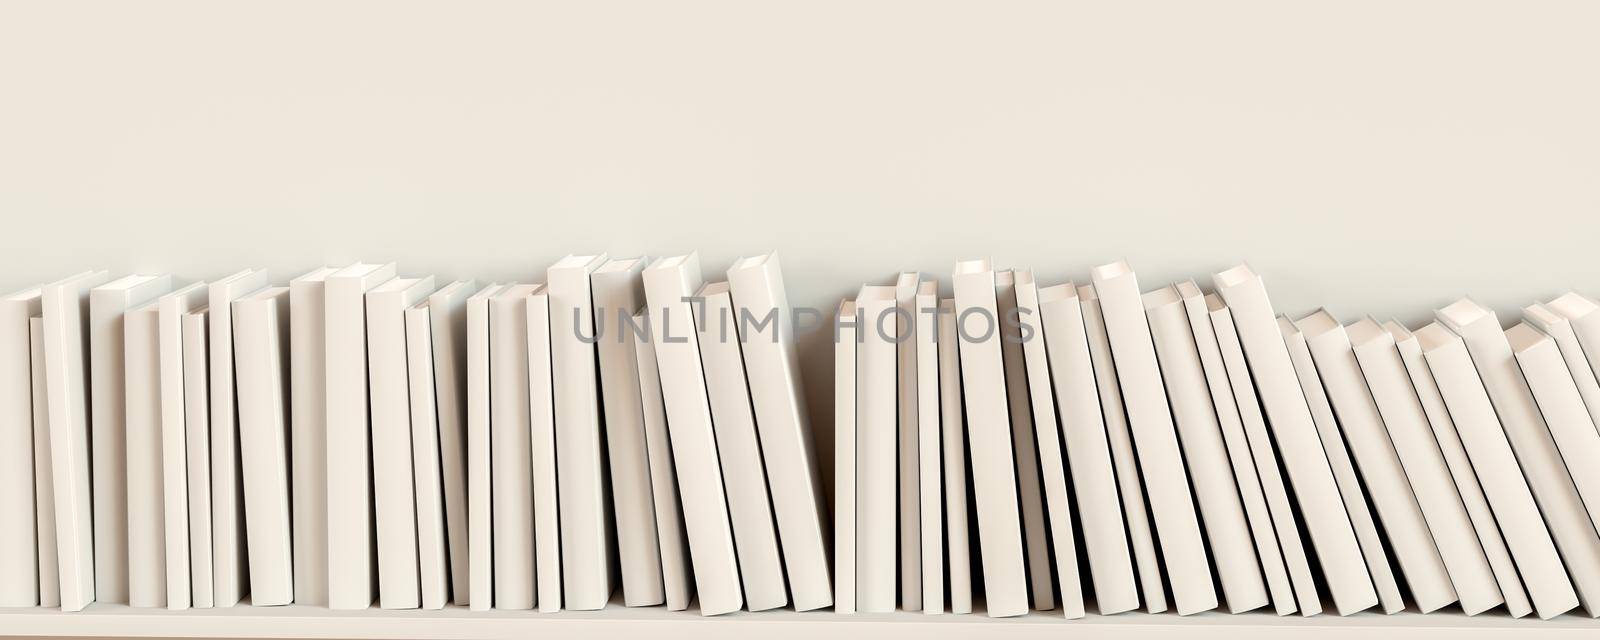 The books are stacked in a row on a white background, 3D rendering illustration.